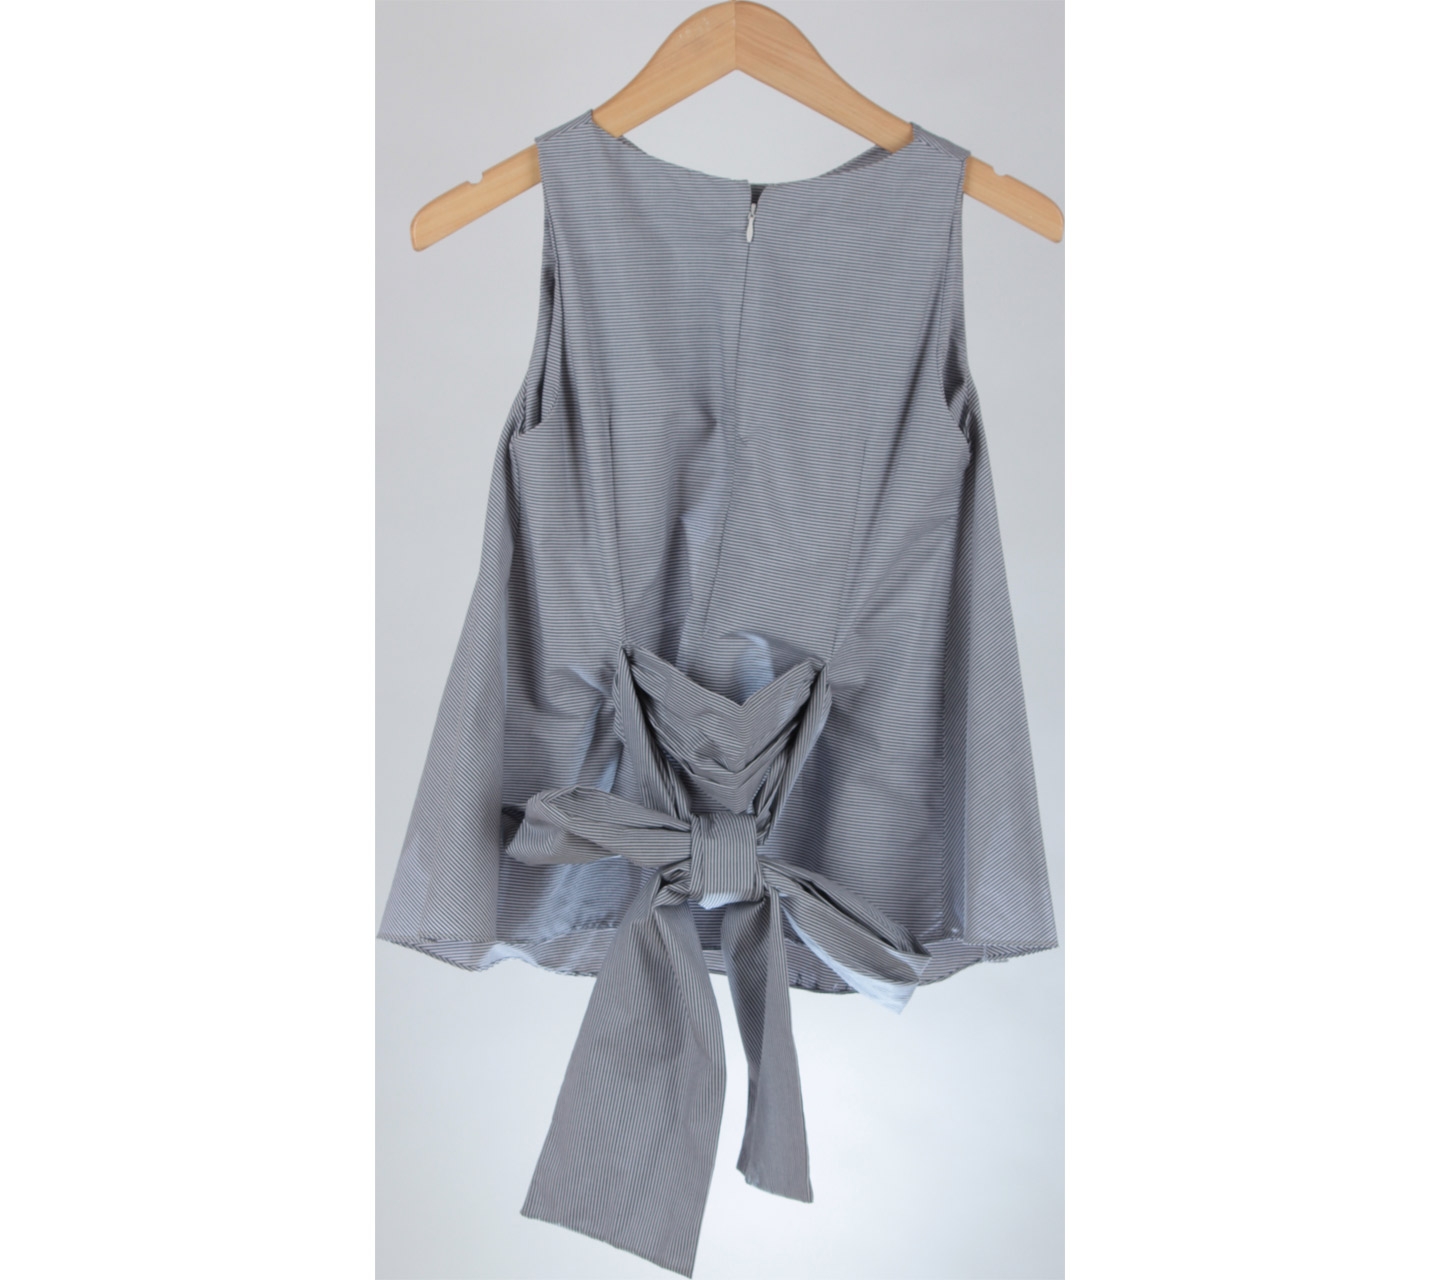 Beatrice Clothing Grey And White Striped Blouse